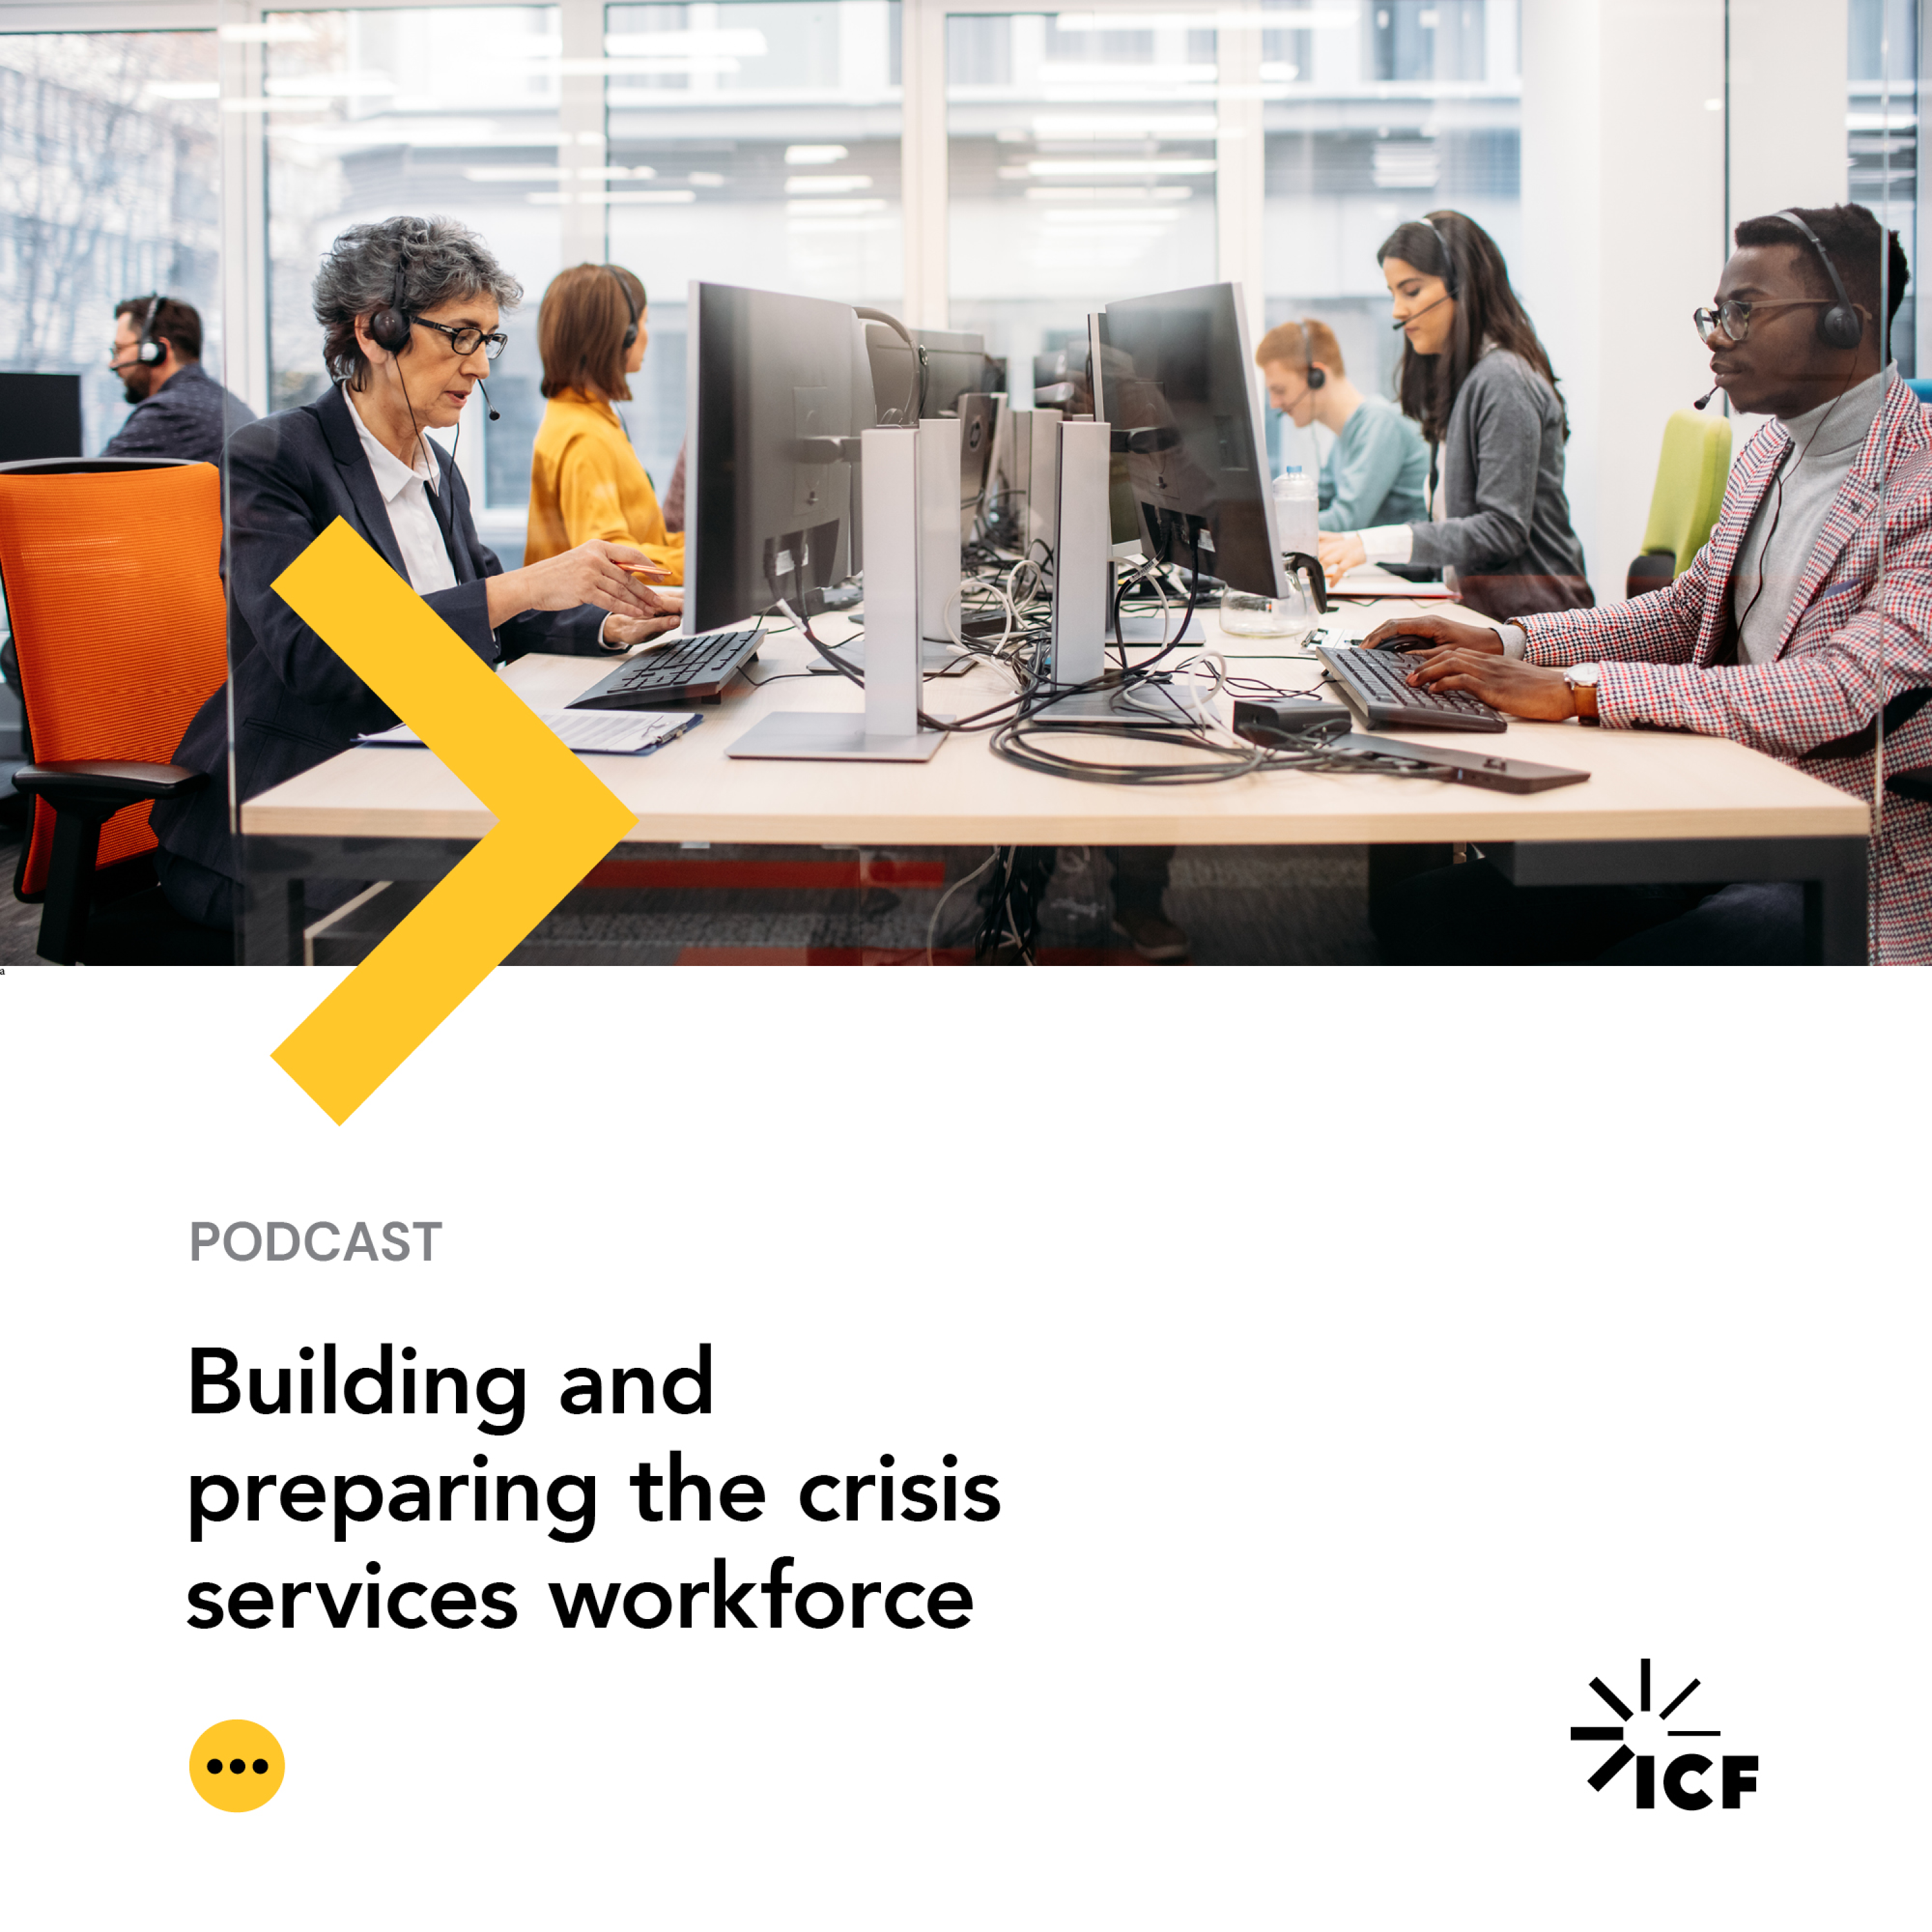 Building and preparing the crisis services workforce